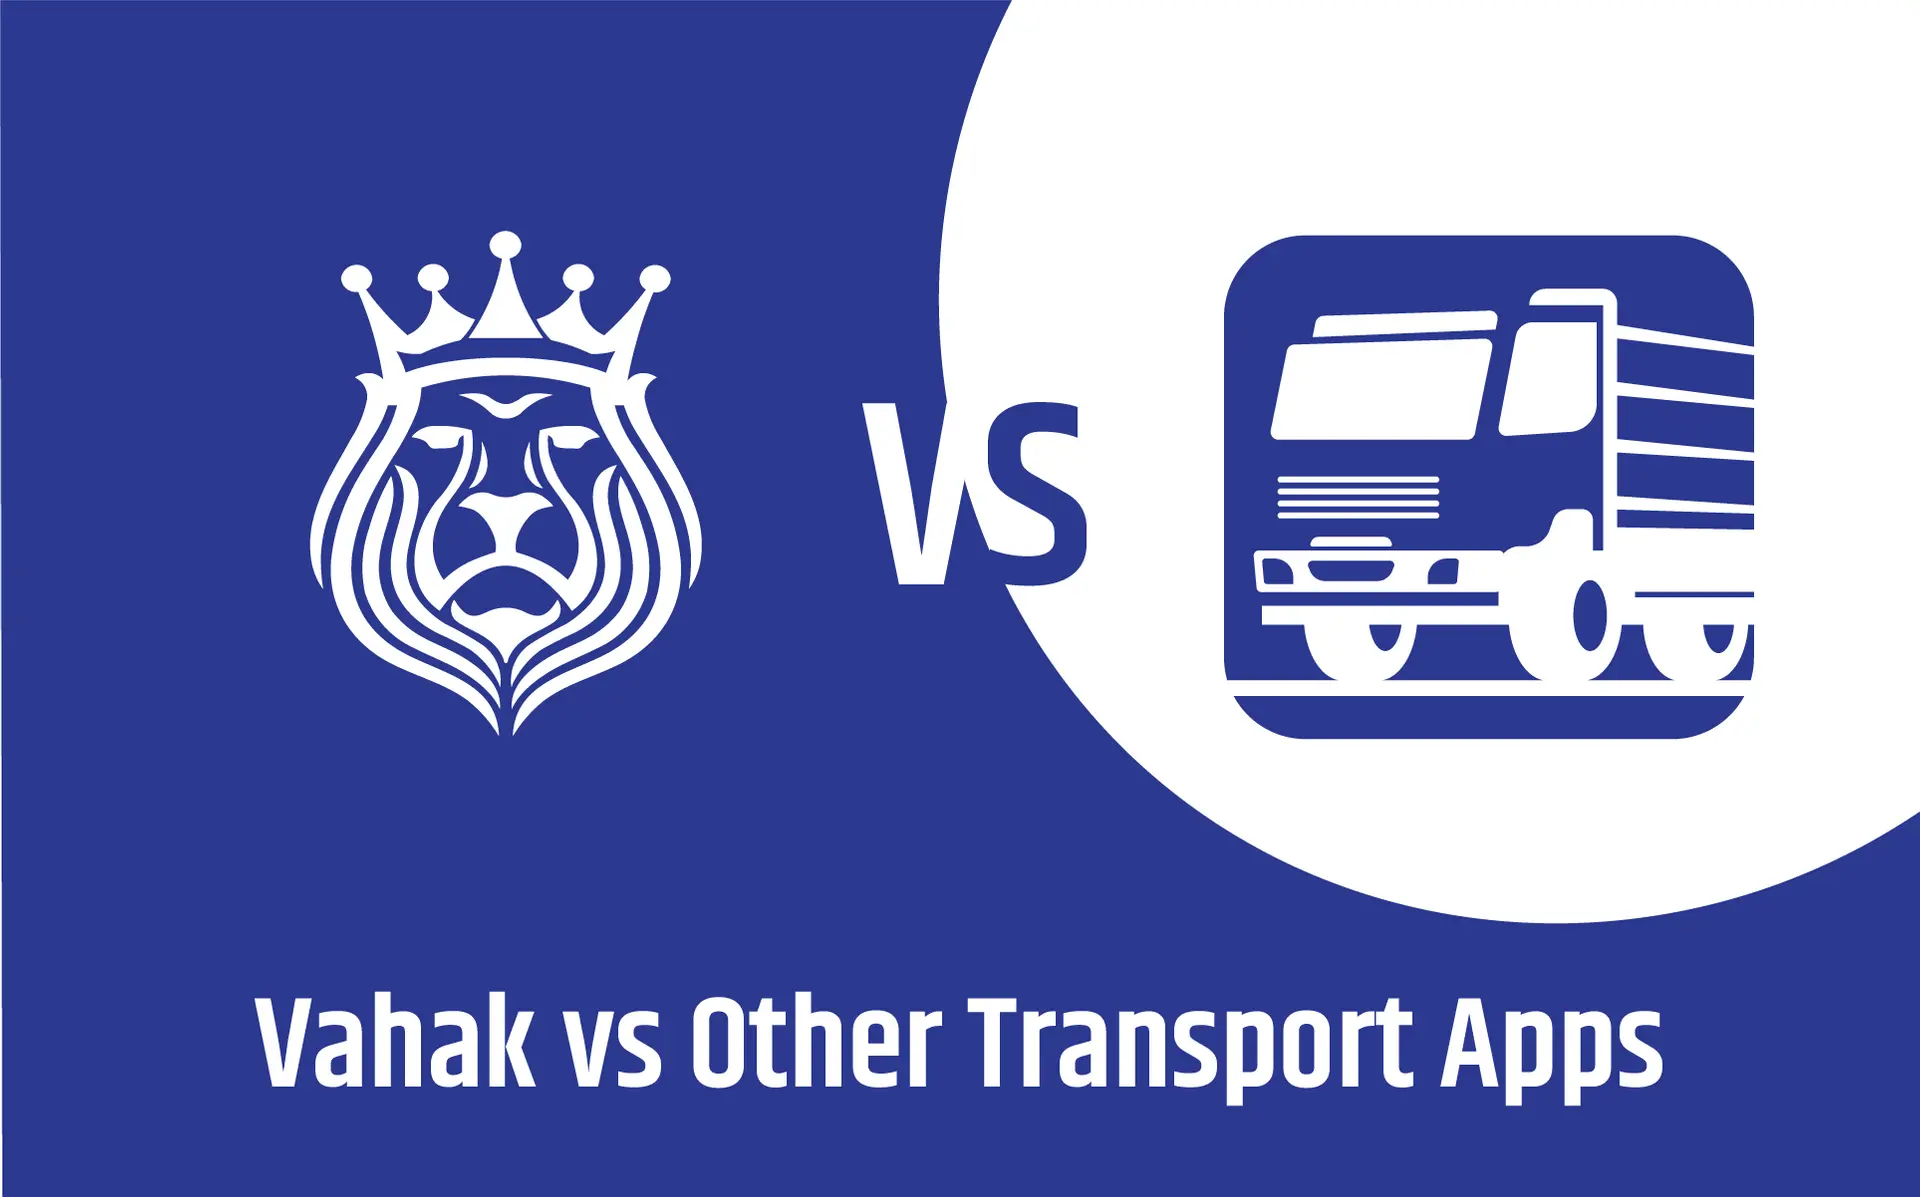 Vahak Vs. Other Transport Apps: Which One is Better?